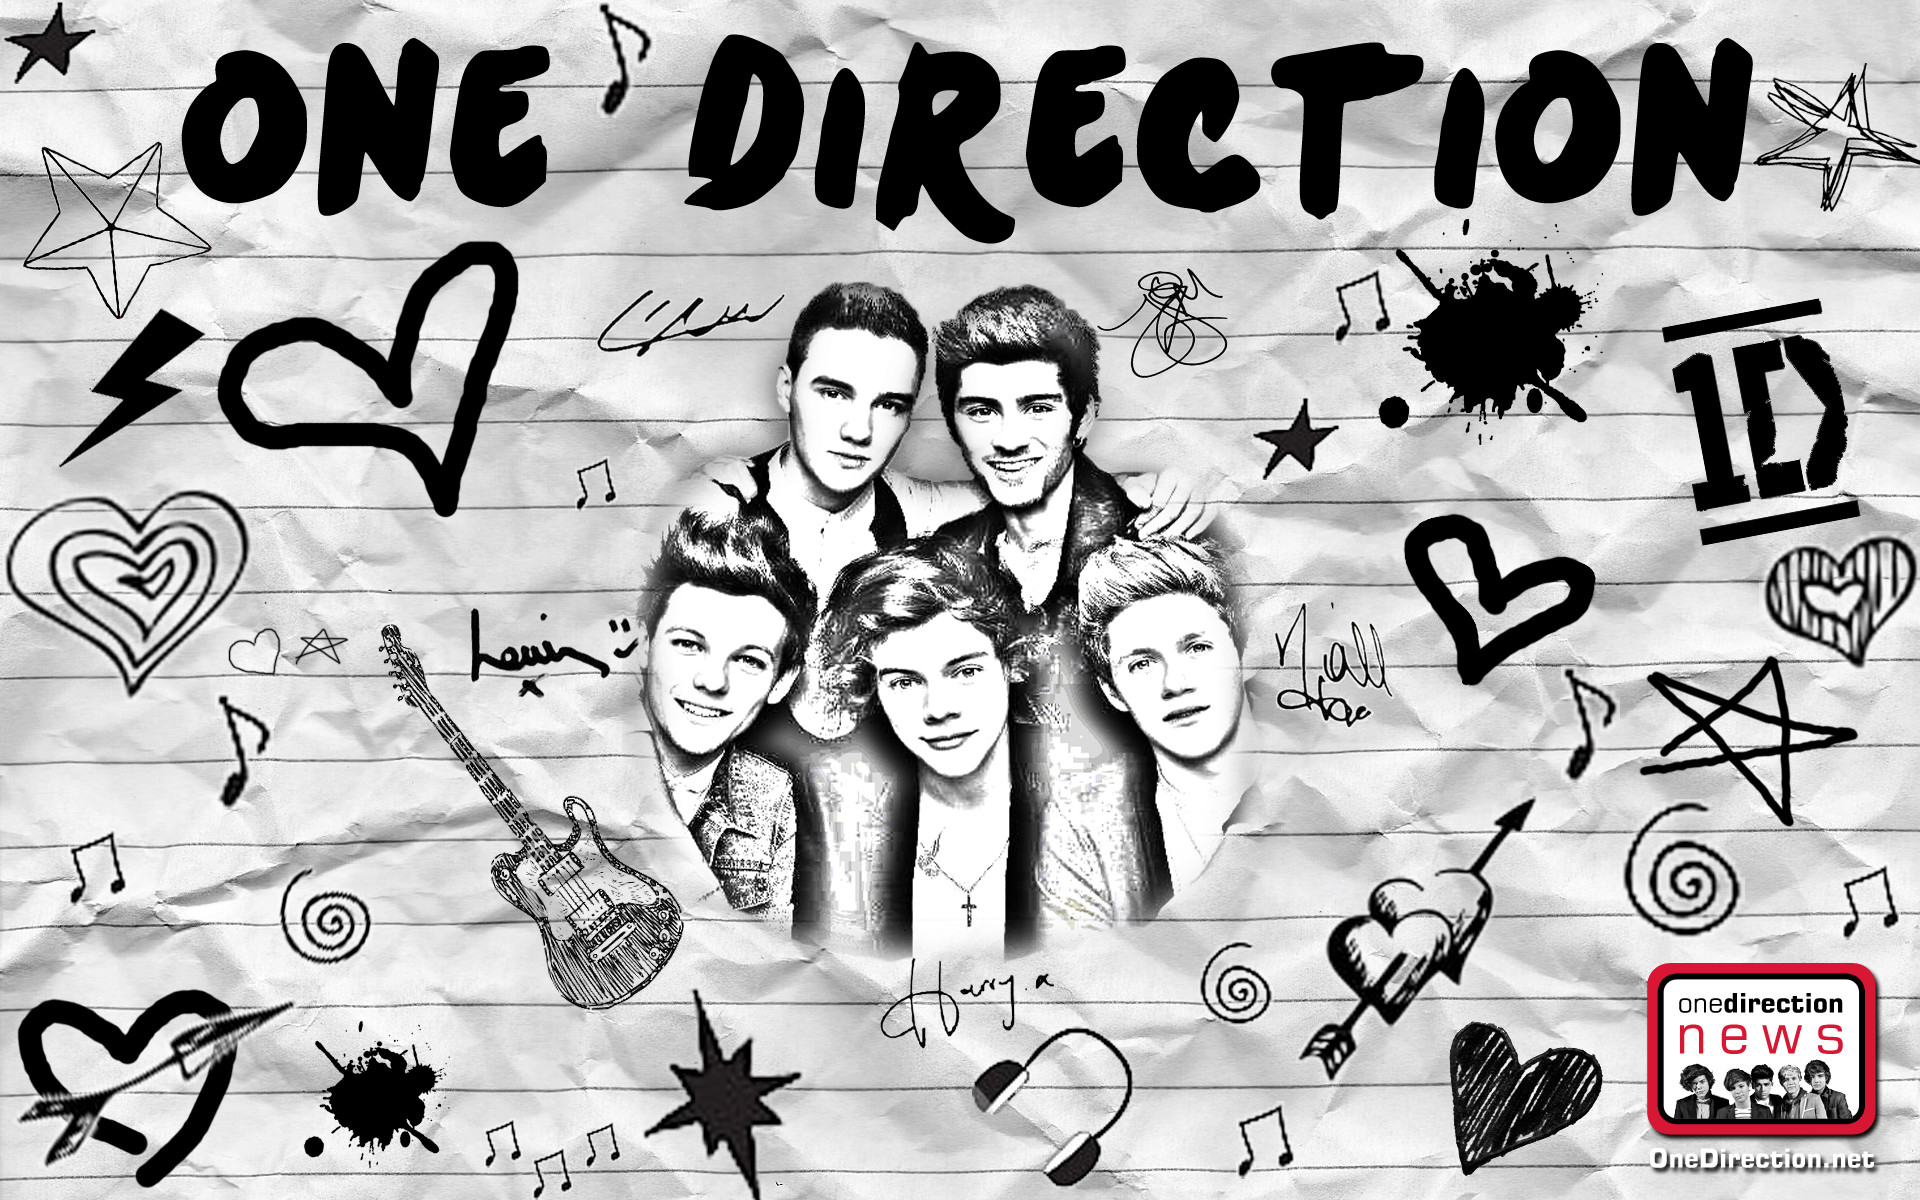 1920x1200 One Direction 2014 Wallpaper For Ipad Image Gallery, Picture .